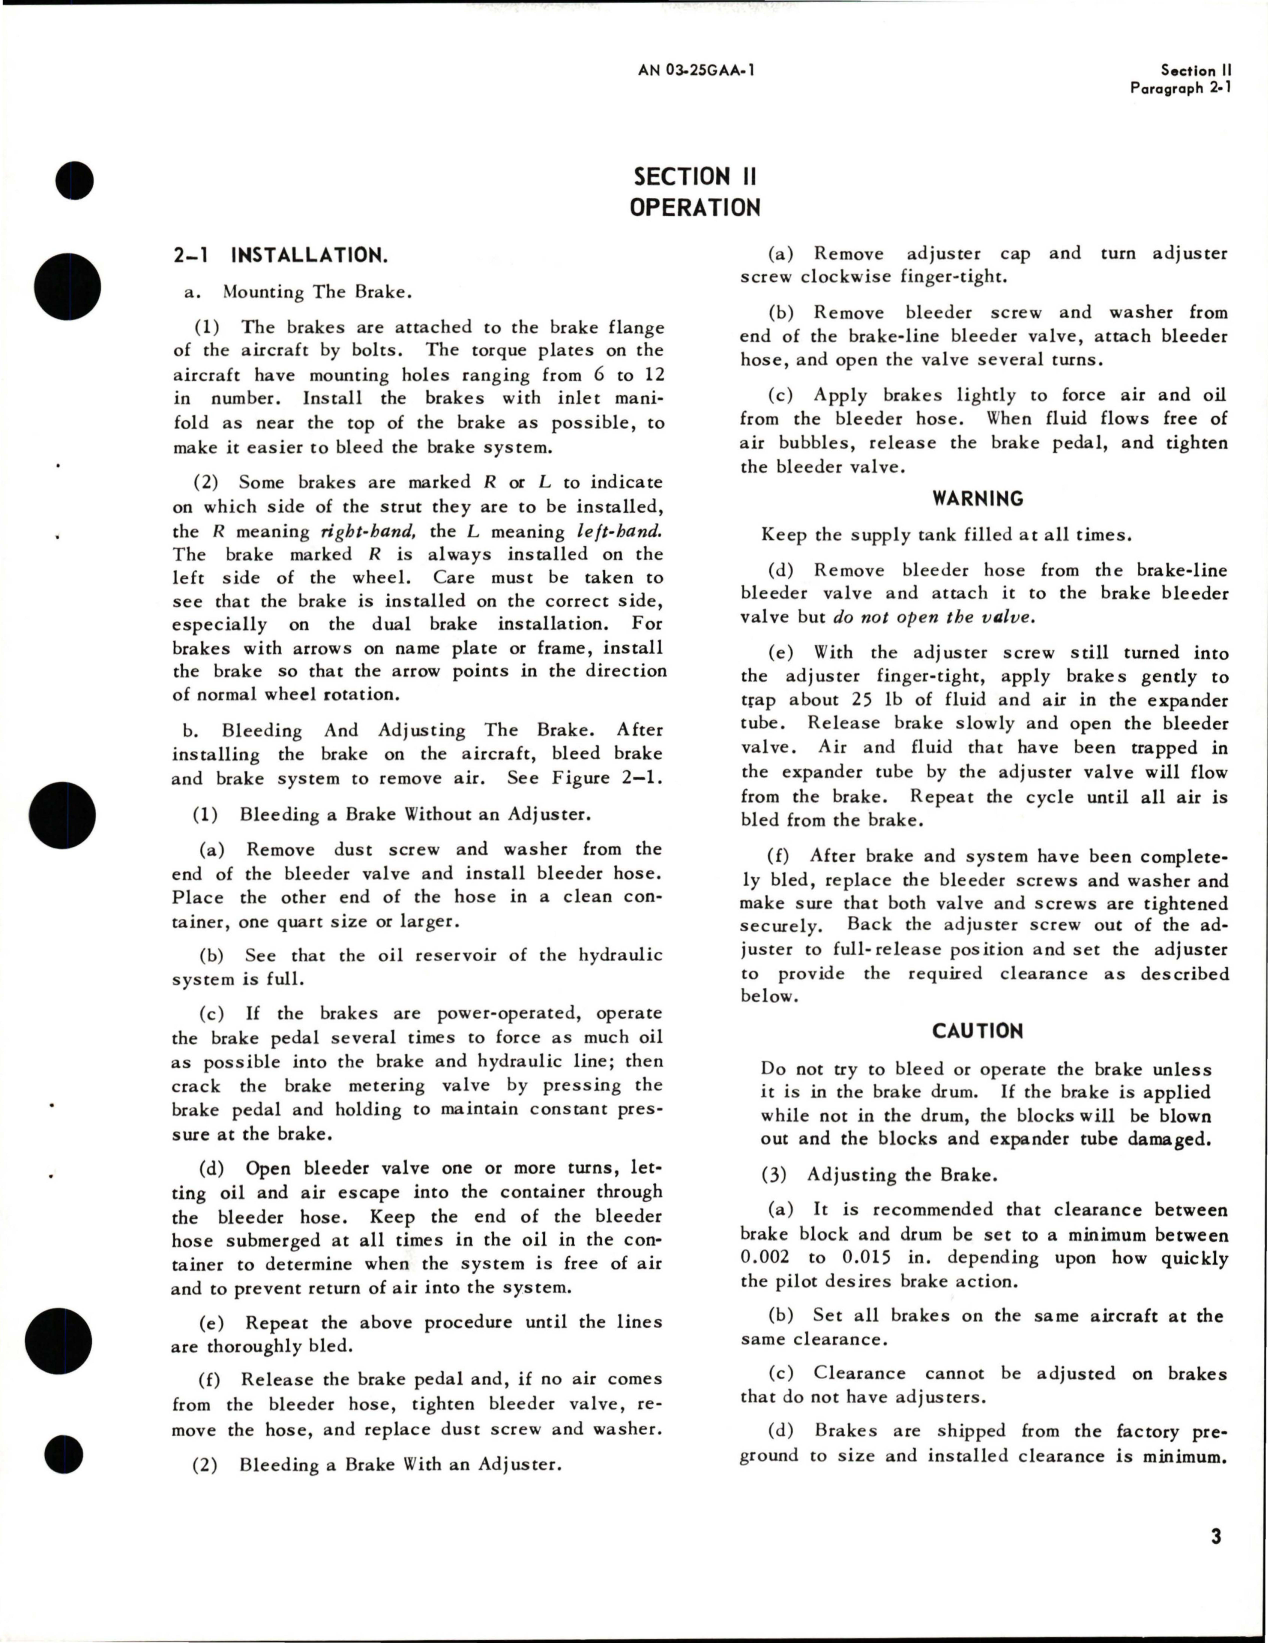 Sample page 7 from AirCorps Library document: Operation, Service and Overhaul Instructions with Illustrated Parts Breakdown for Expander Tube Brakes 